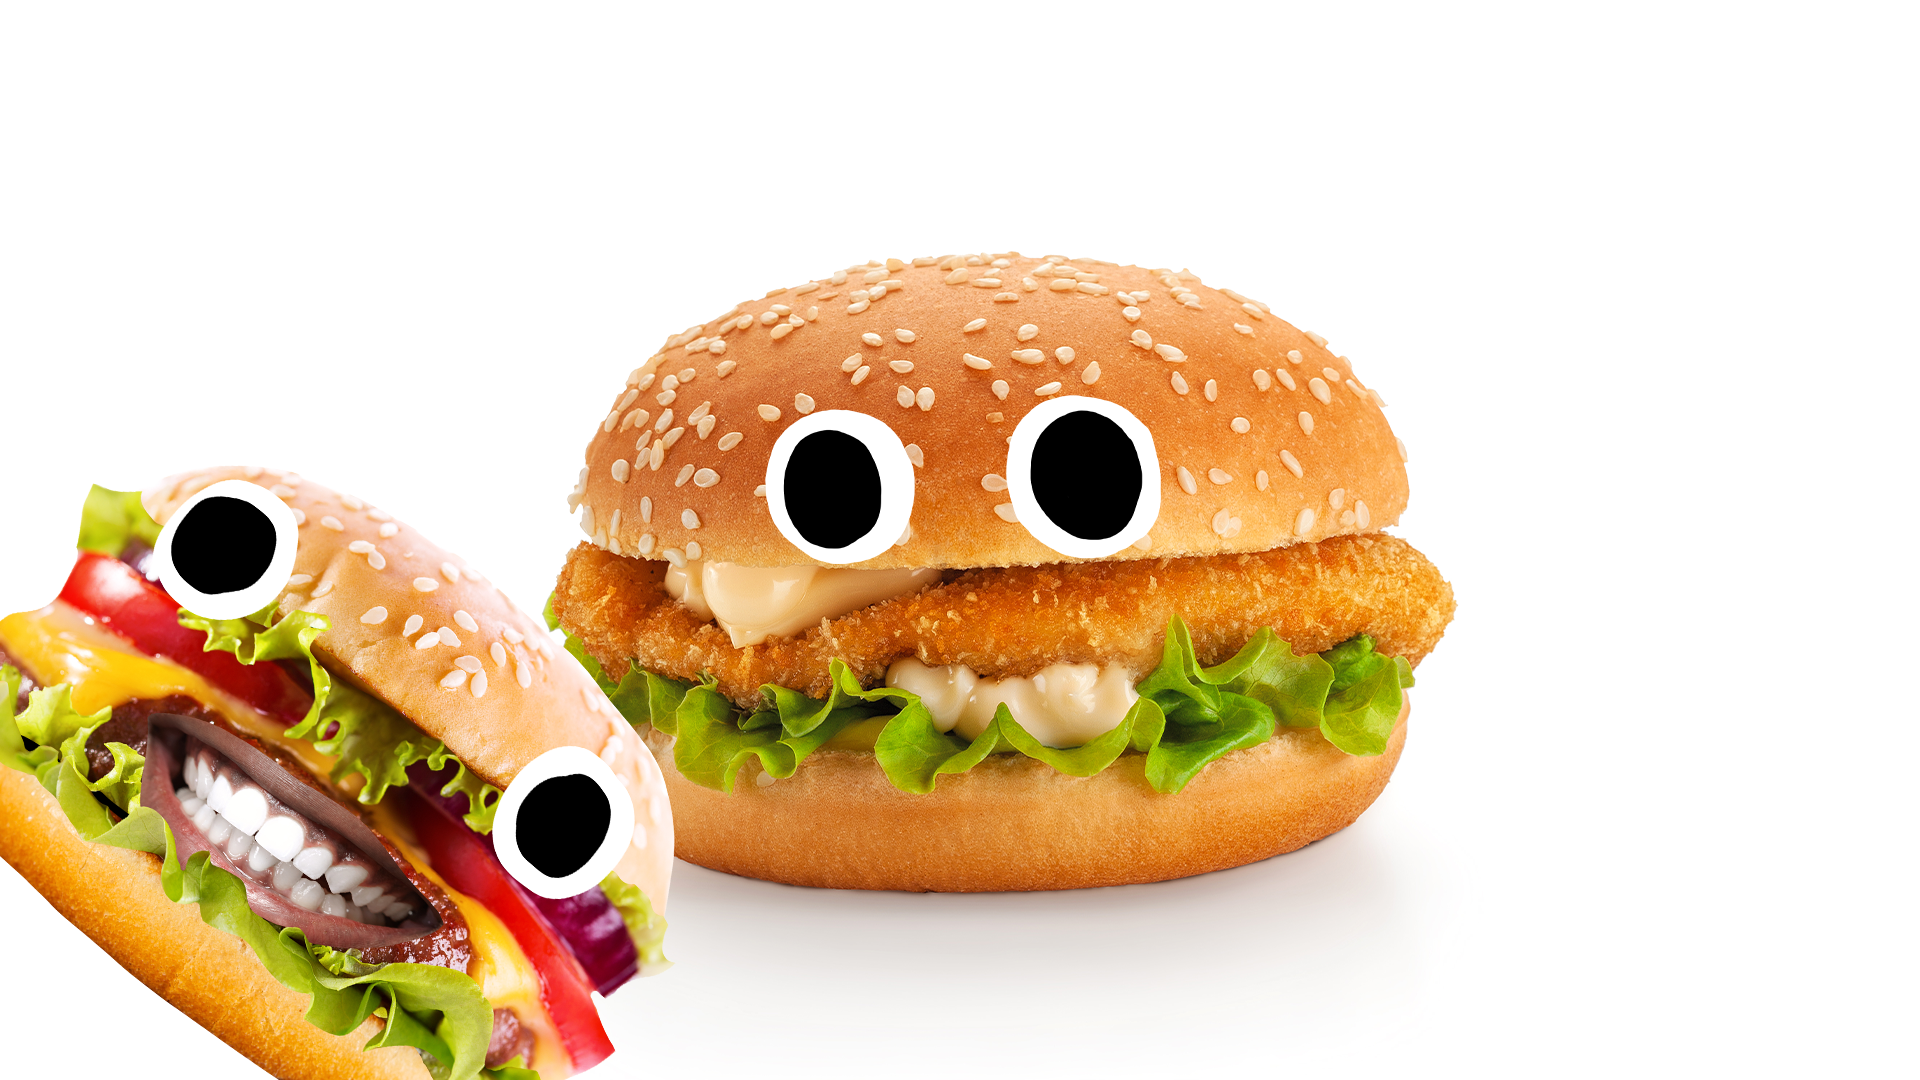 Two burgers with silly faces on white background